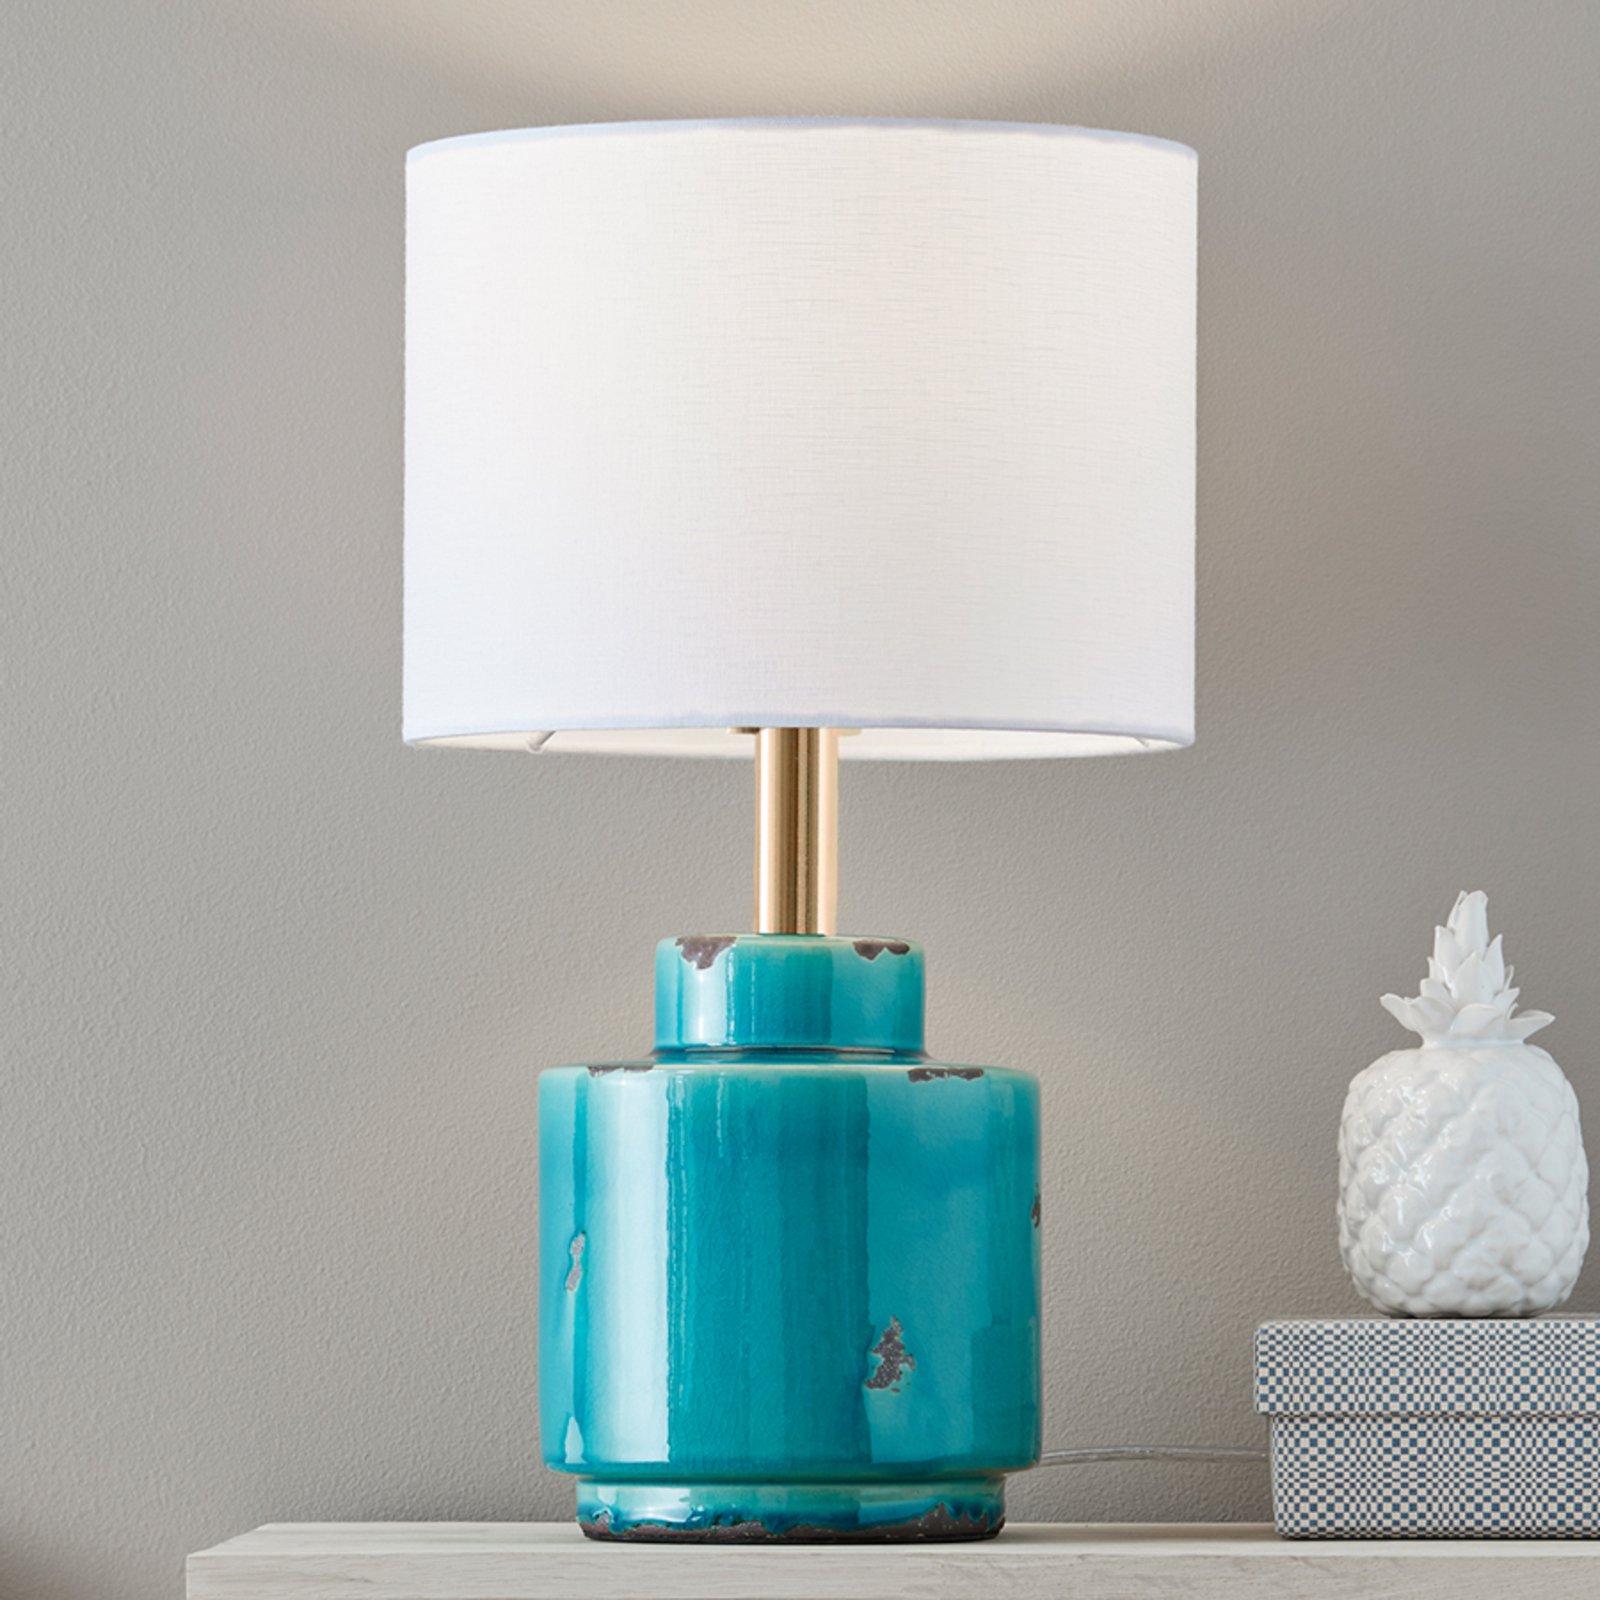 Fabric table lamp Cous with ceramic base